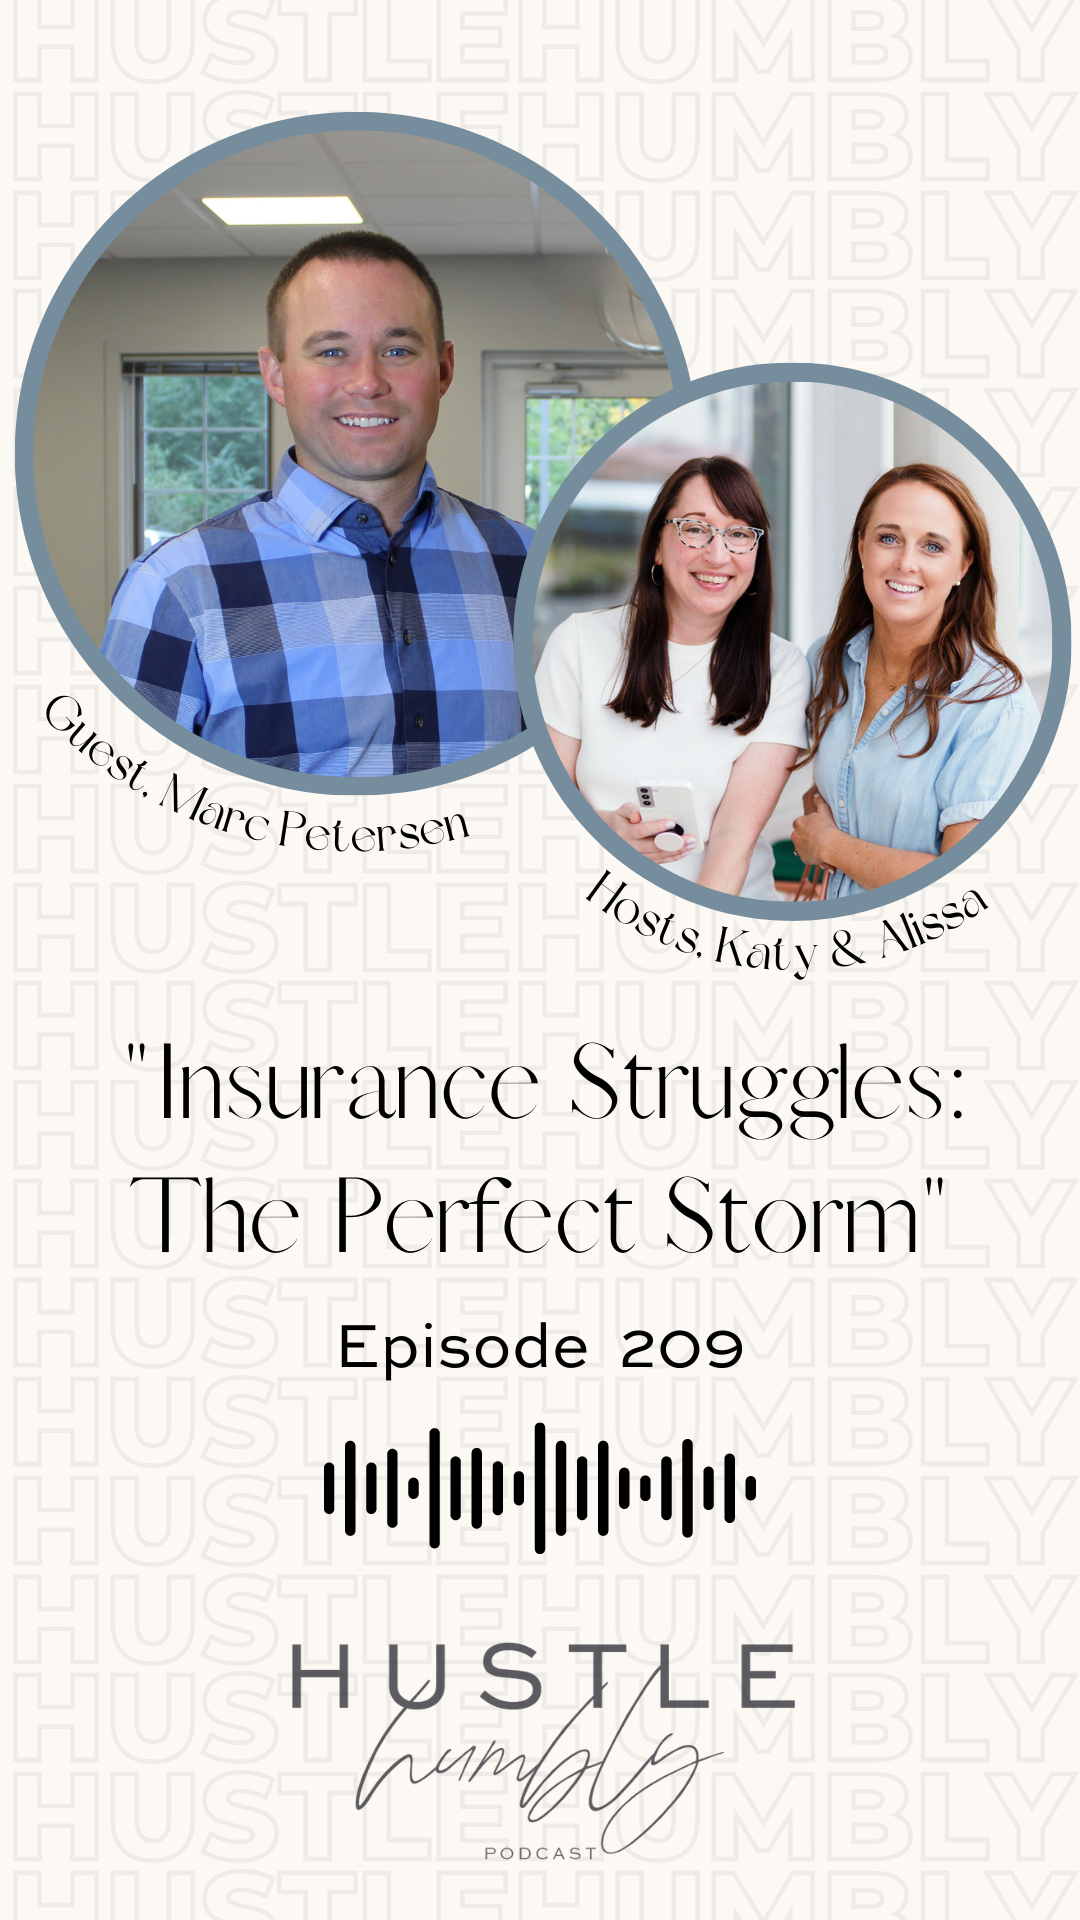 Alissa and Katy, hosts of Hustle Humbly podcast, interviewing Marc Petersen about insurance struggles.